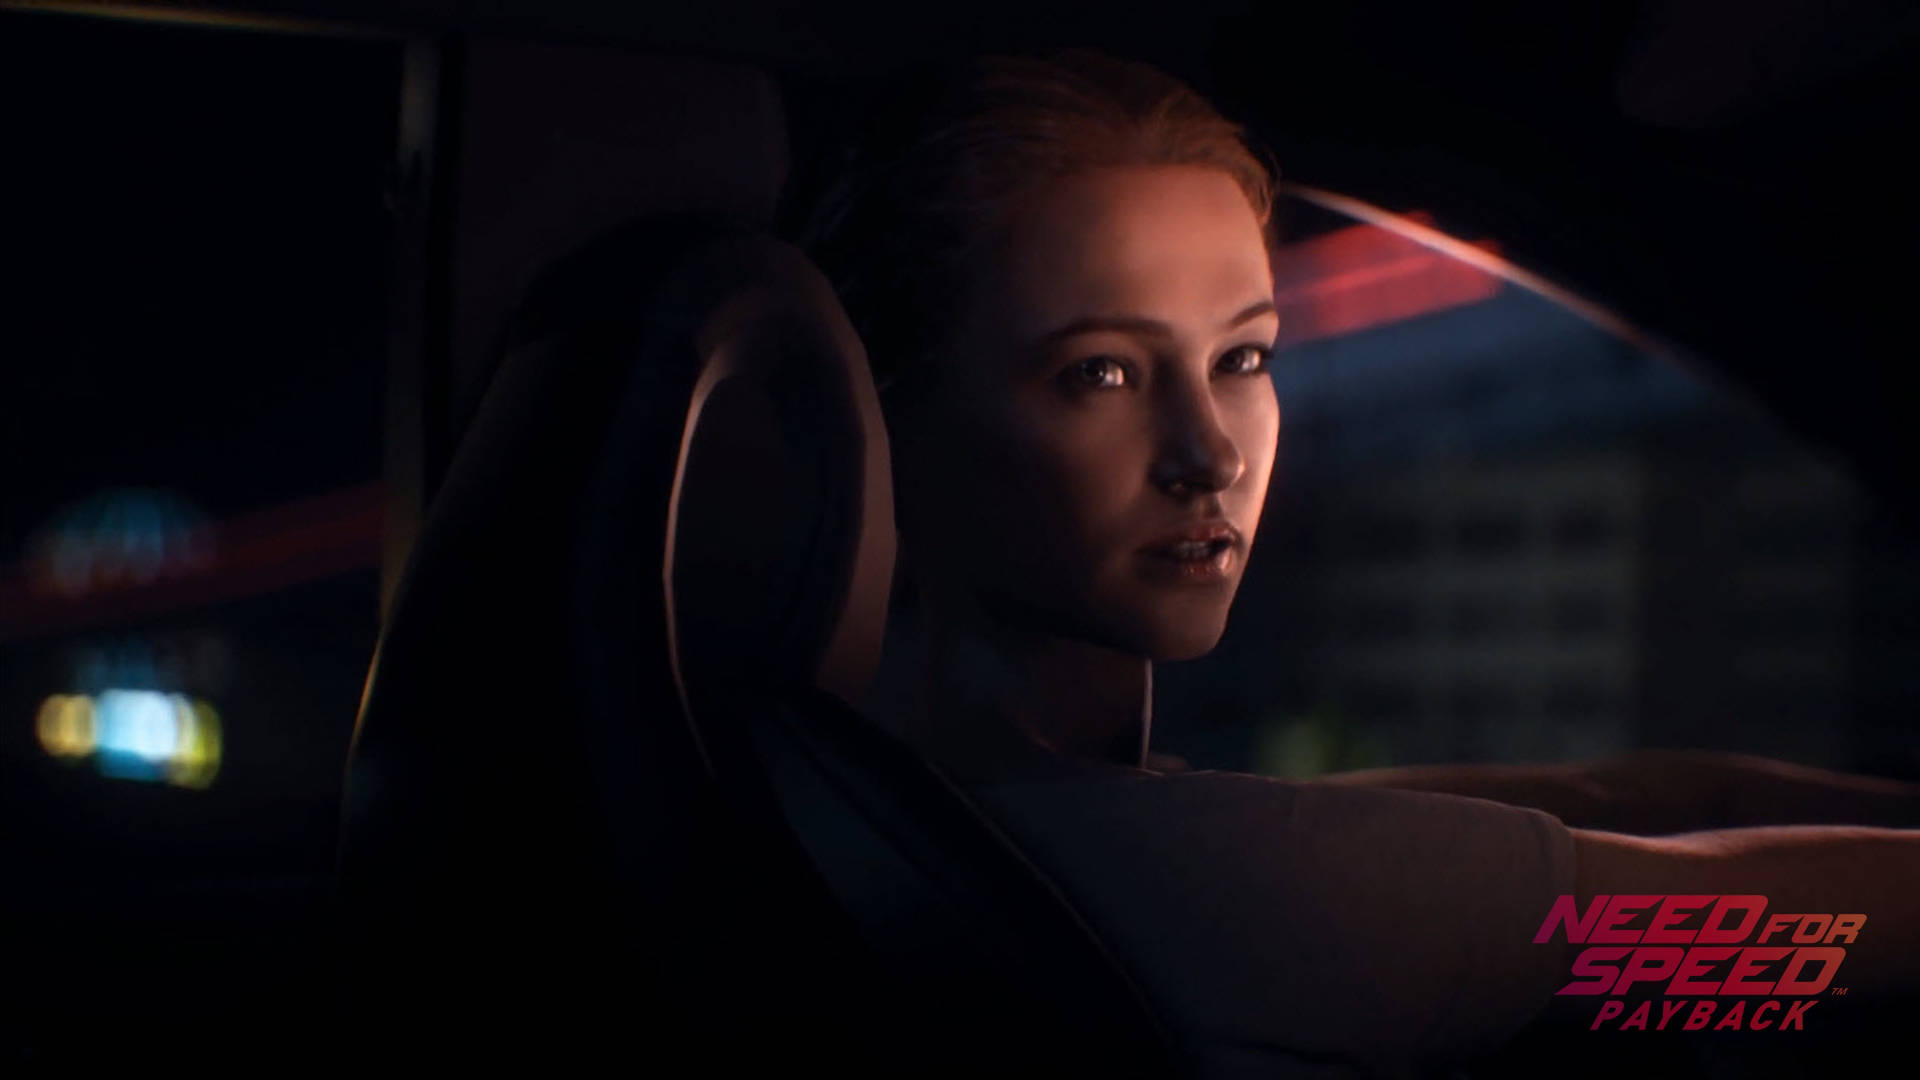 Jessica Miller in high-action racing in Need for Speed Payback. Wallpaper